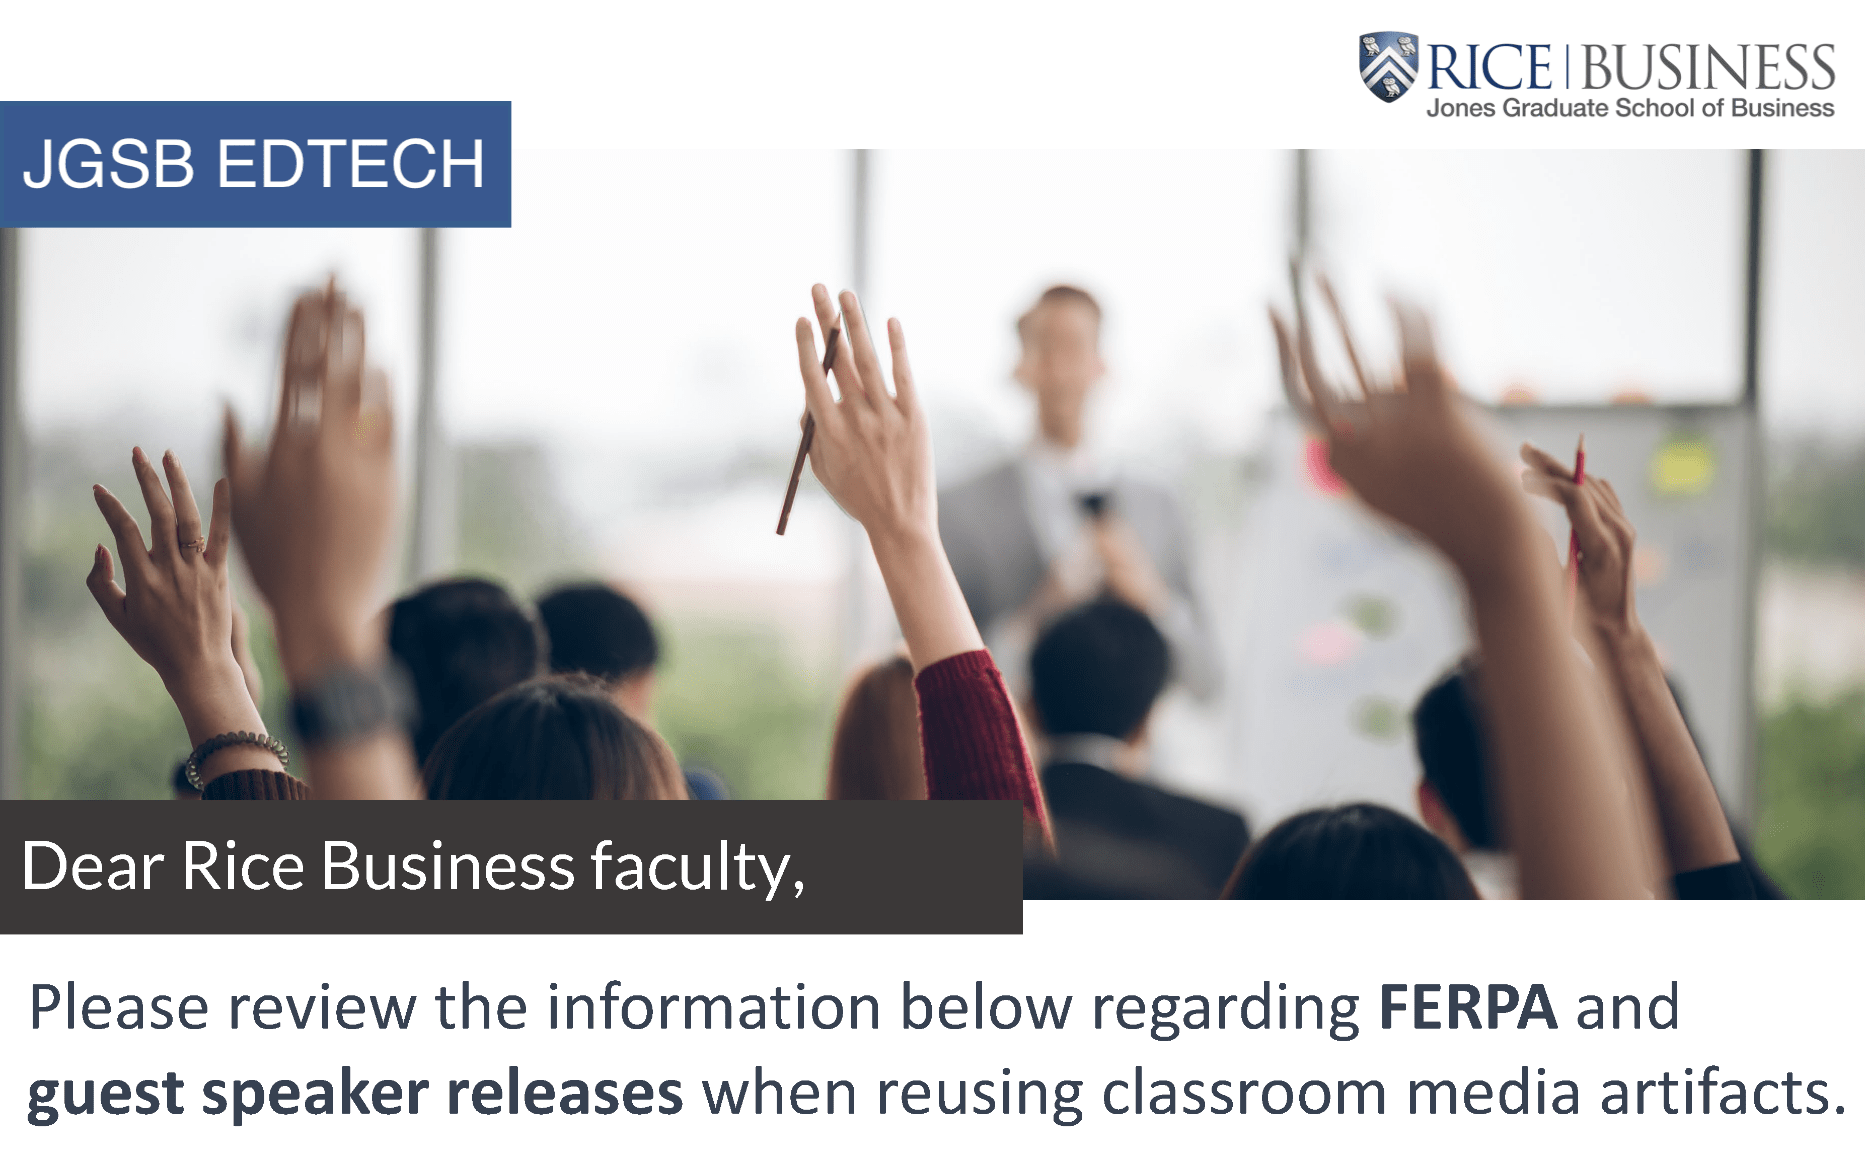 JGSB Ed Tech at Rice Business. Dear Rice Business Faculty, Please review the information below regarding FERPA and guest speaker releases when reusing classroom media artifacts.